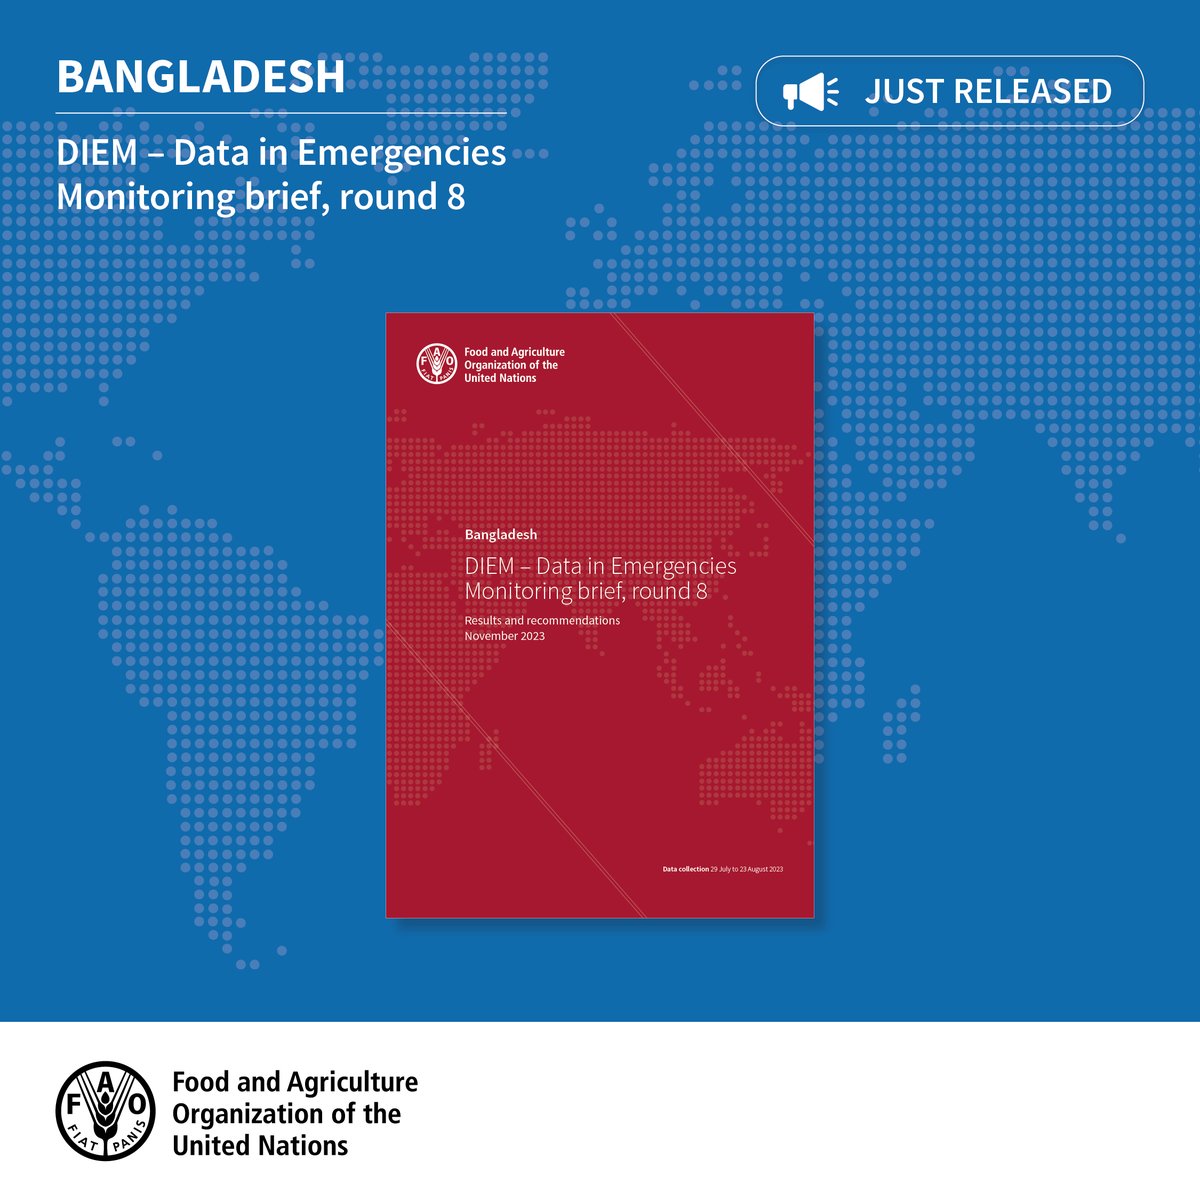 Discover key findings and recommendations for humanitarian actors to utilize when planning and implementing data-driven programming to sustain livelihoods in #Bangladesh.
Check out the new #DataInEmergencies monitoring brief for the eighth round 👉bit.ly/40pCHUa